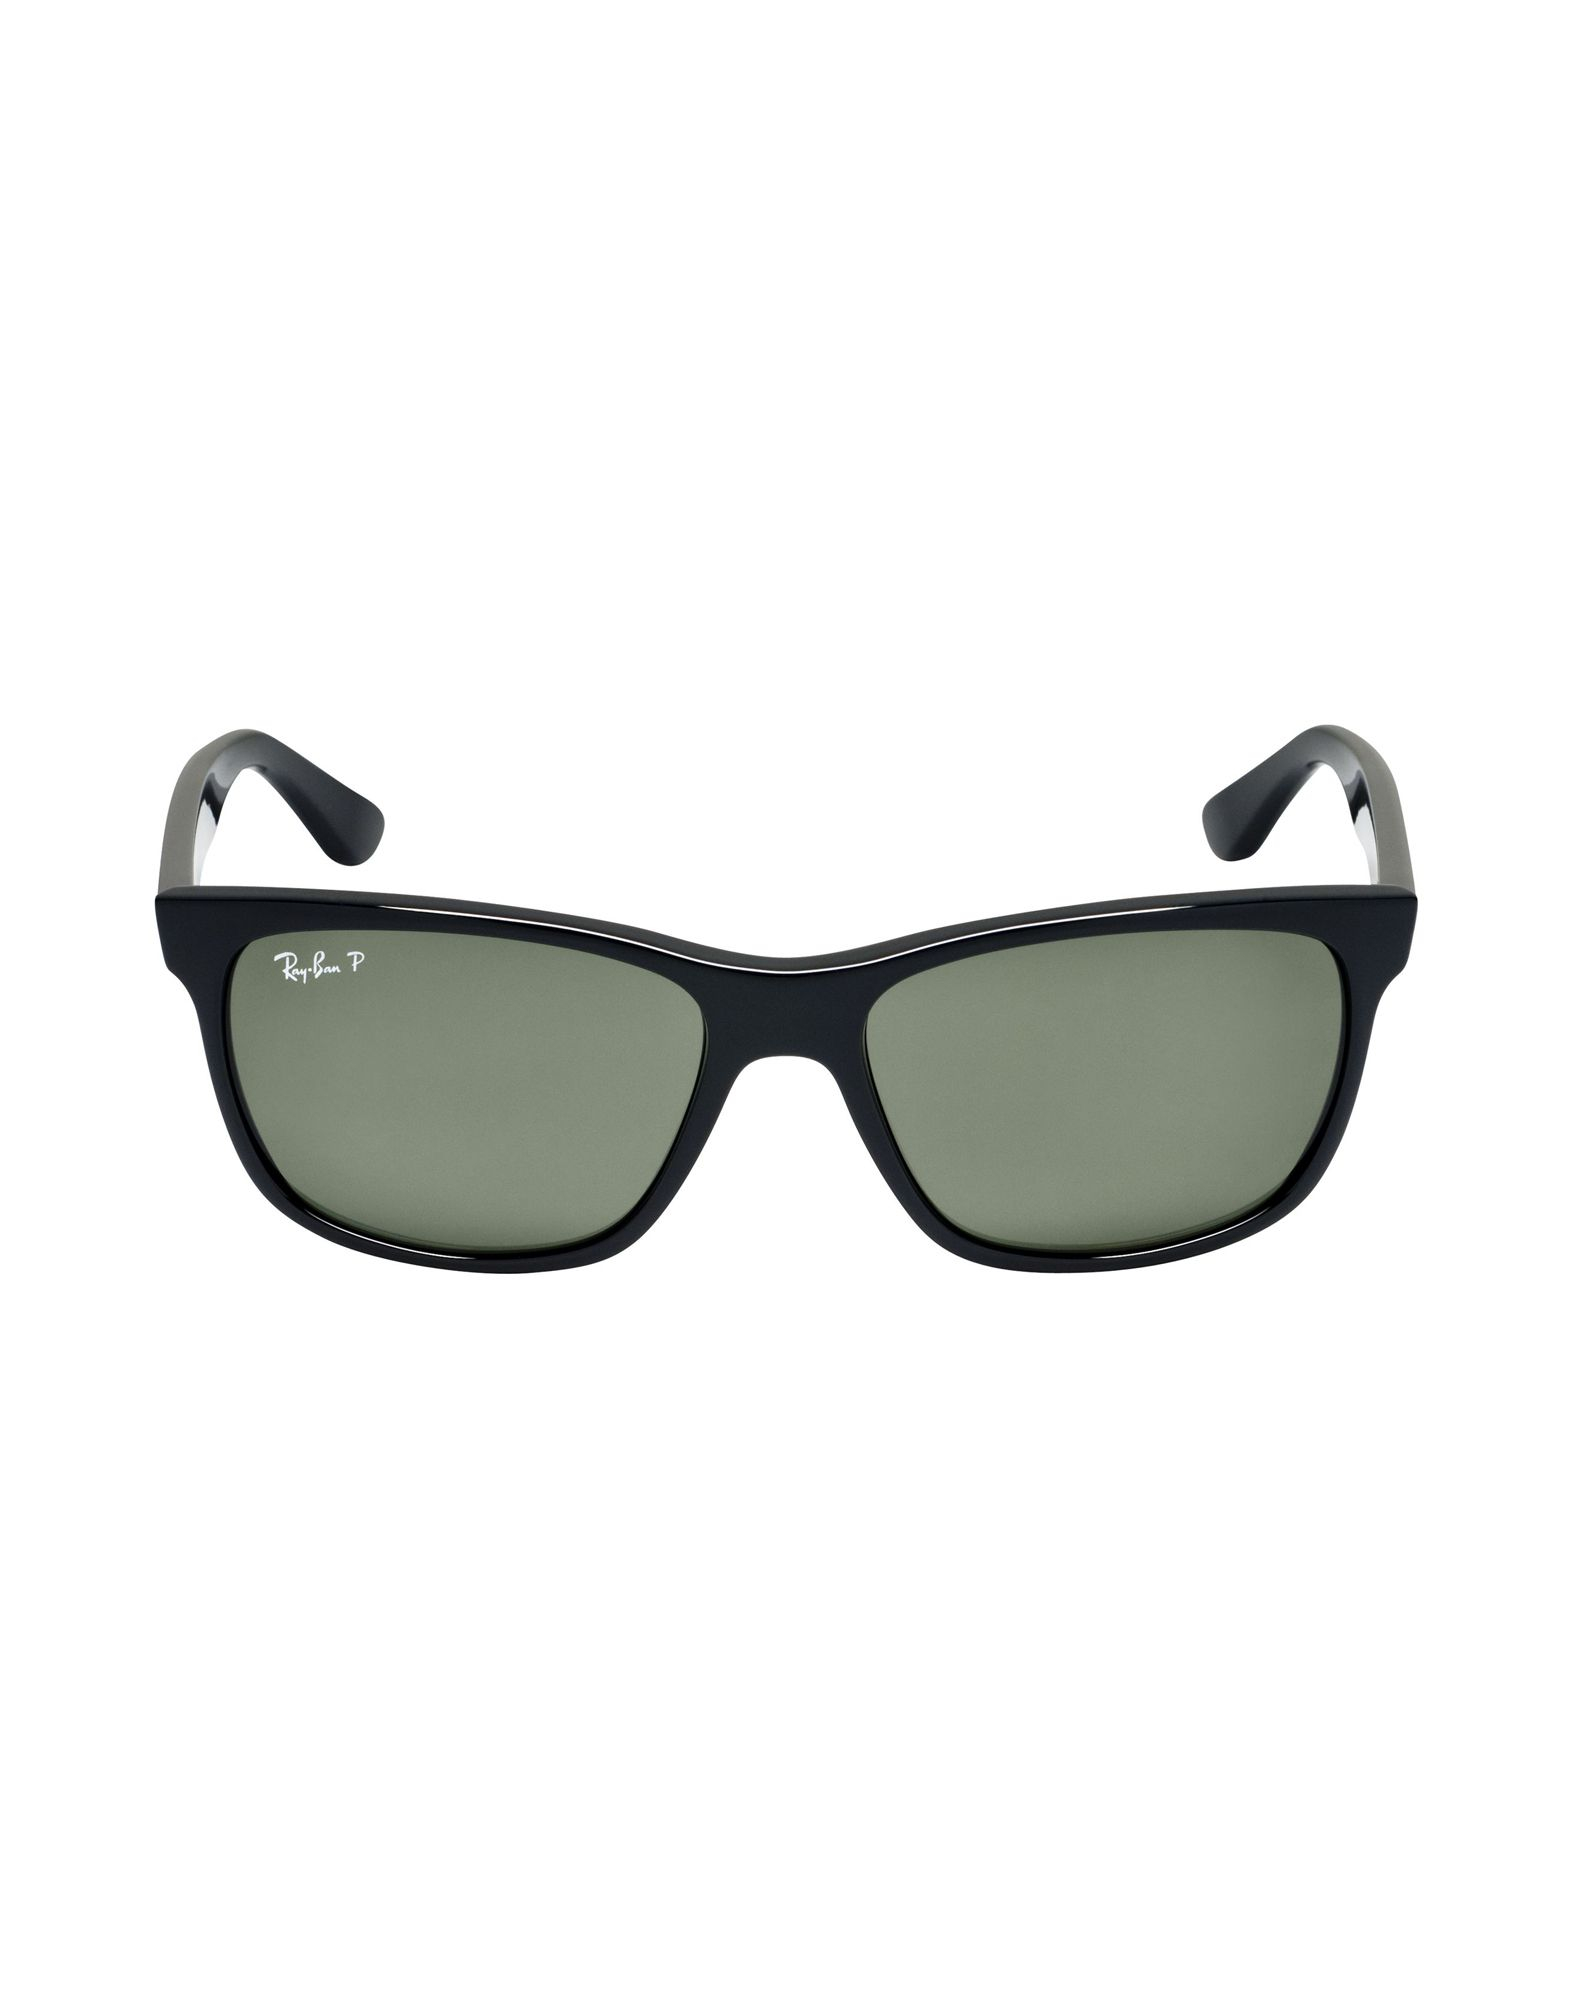 Ray-ban Sunglasses in Black | Lyst